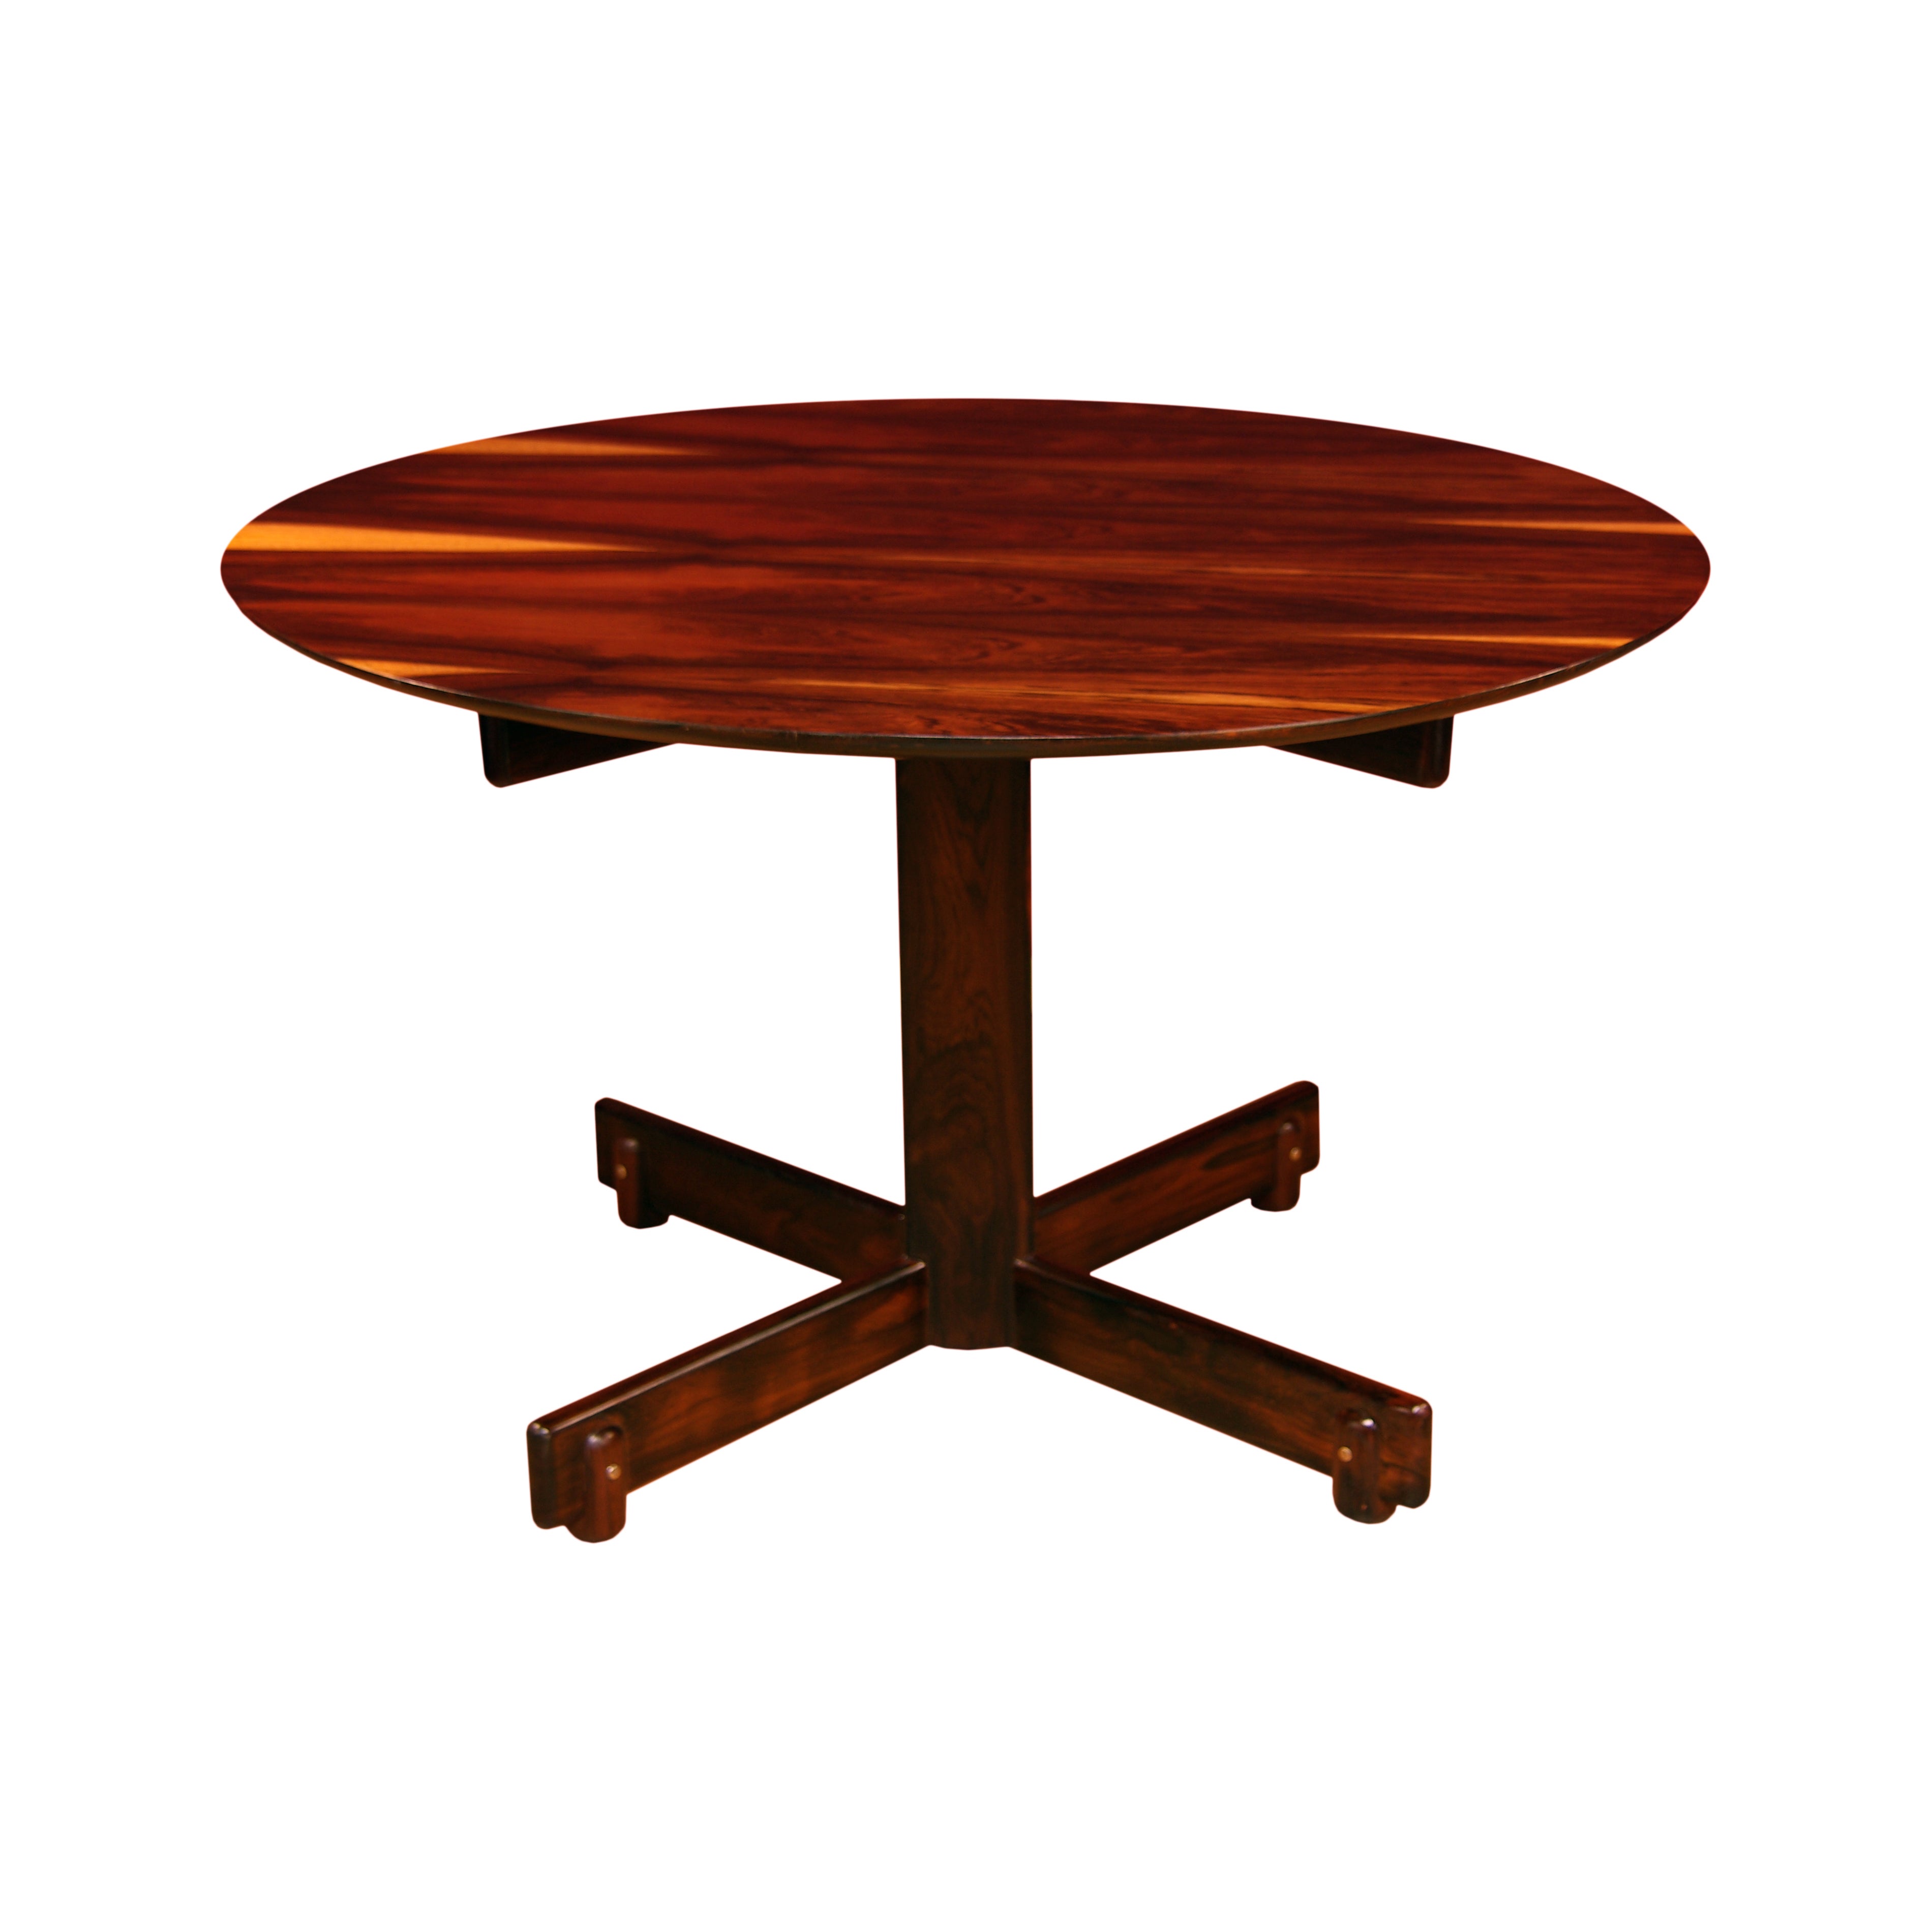 Rosewood "Alex" Dining Table by Sergio Rodrigues